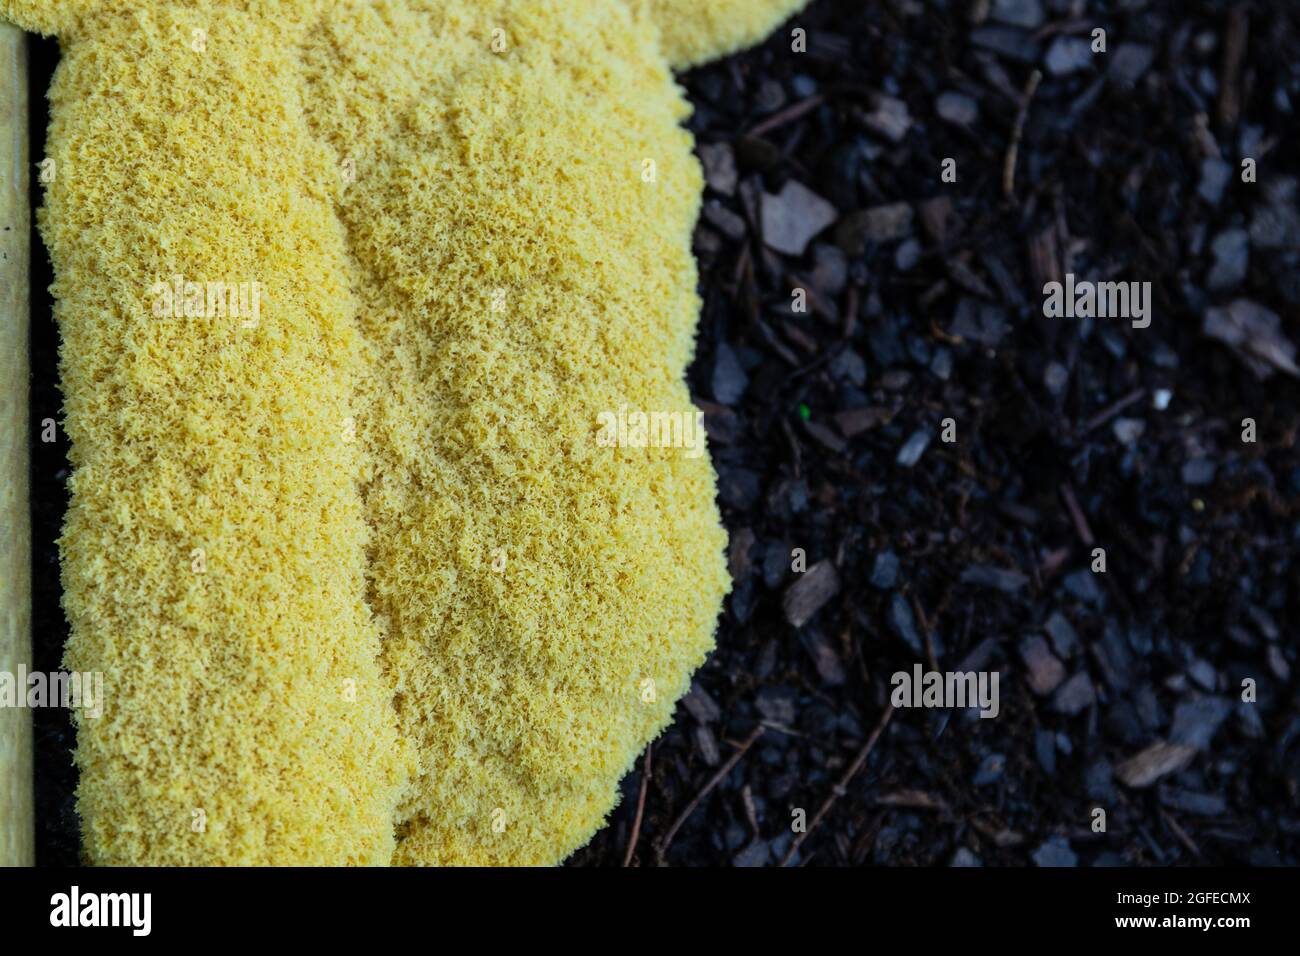 Fuligo septica slime mold in a garden bed growing on dark mulch, yellow dog's vomit slime mould, copy space, horizontal aspect Stock Photo